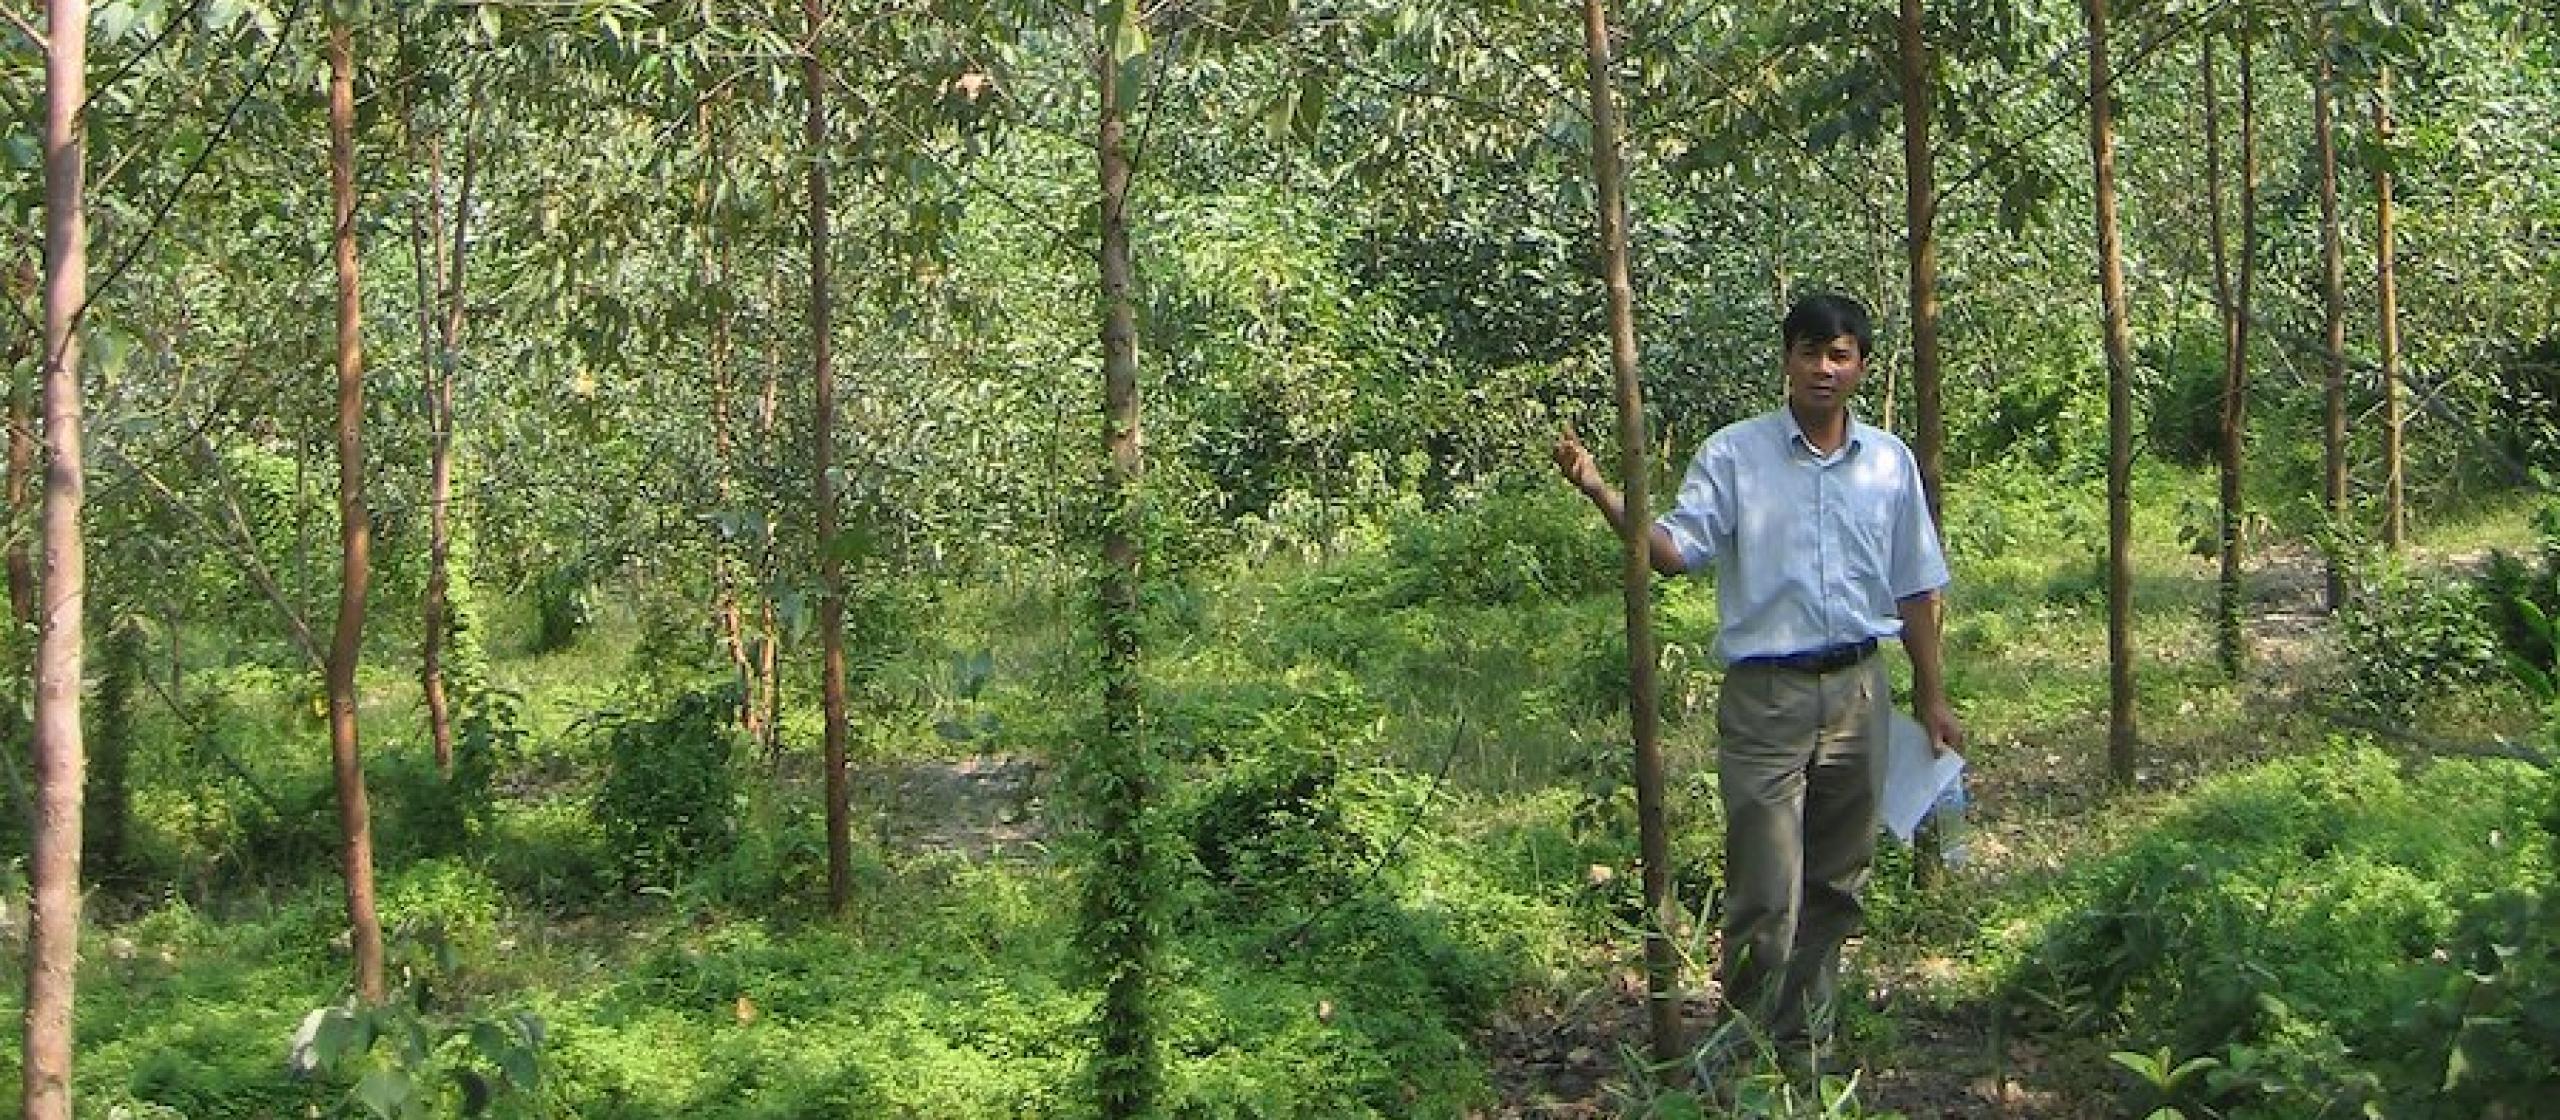 A man stands in a forest